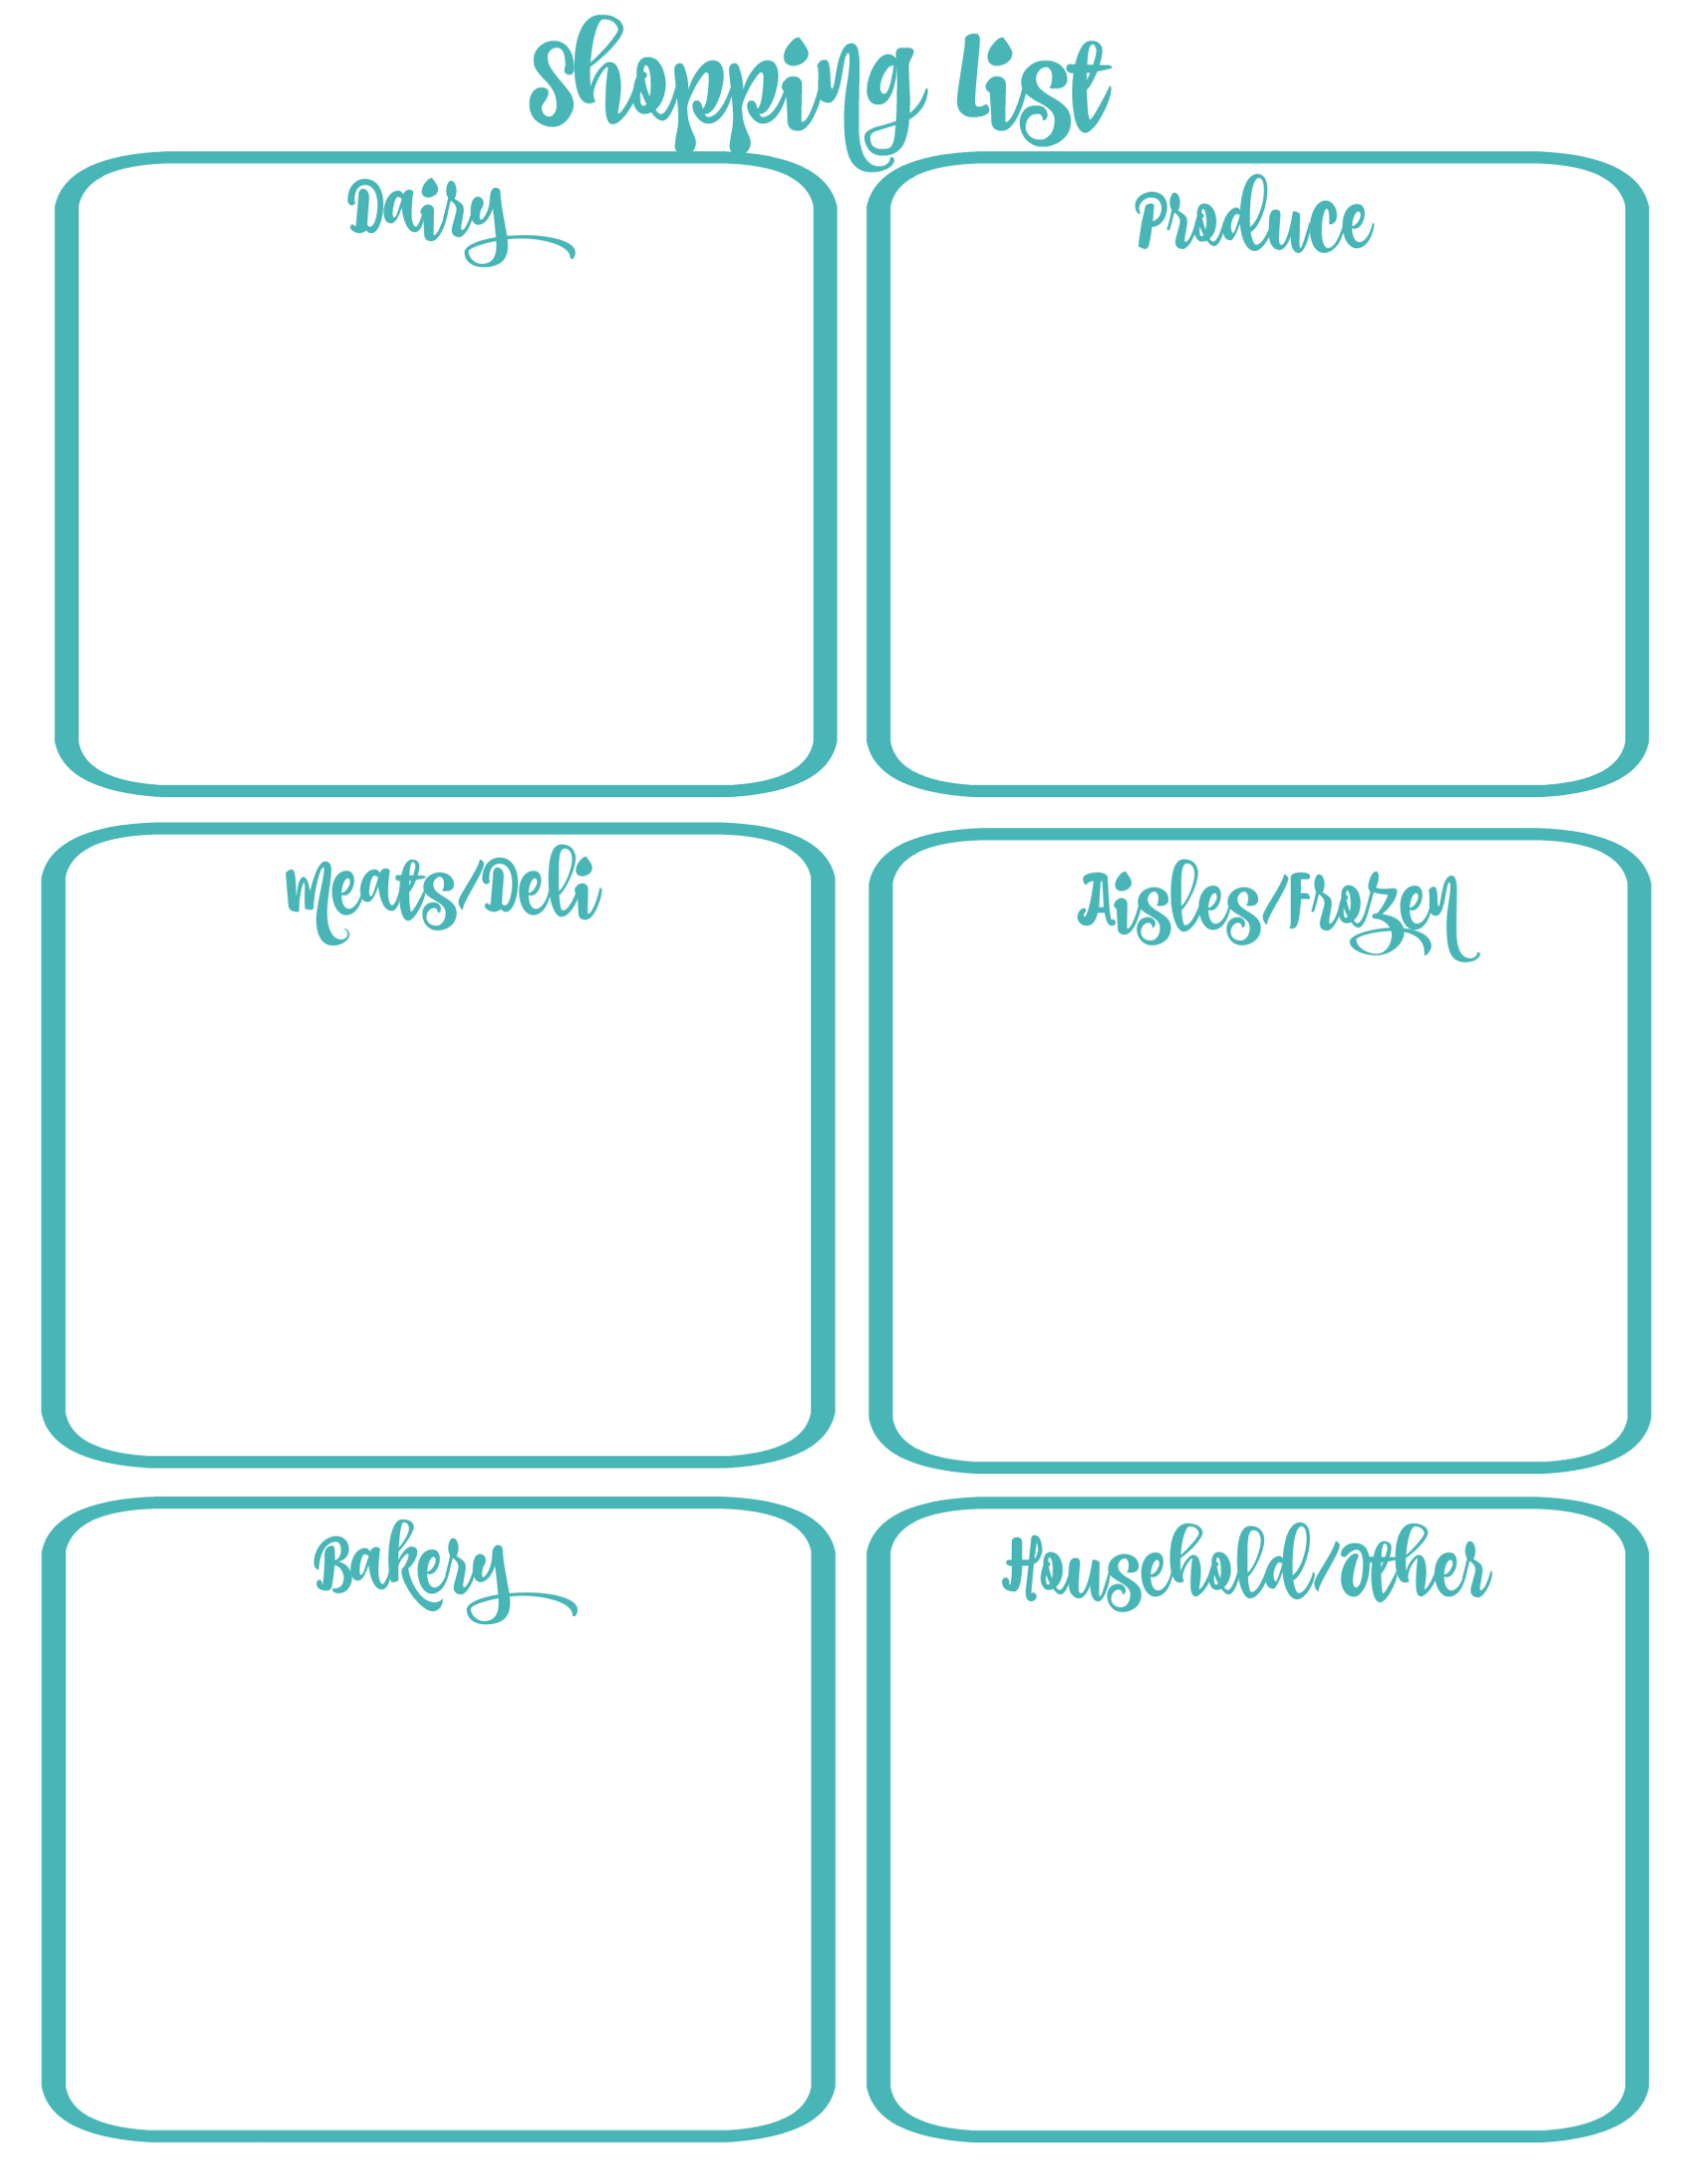 Free Printable Weekly Shopping List at thehappyhousie.com